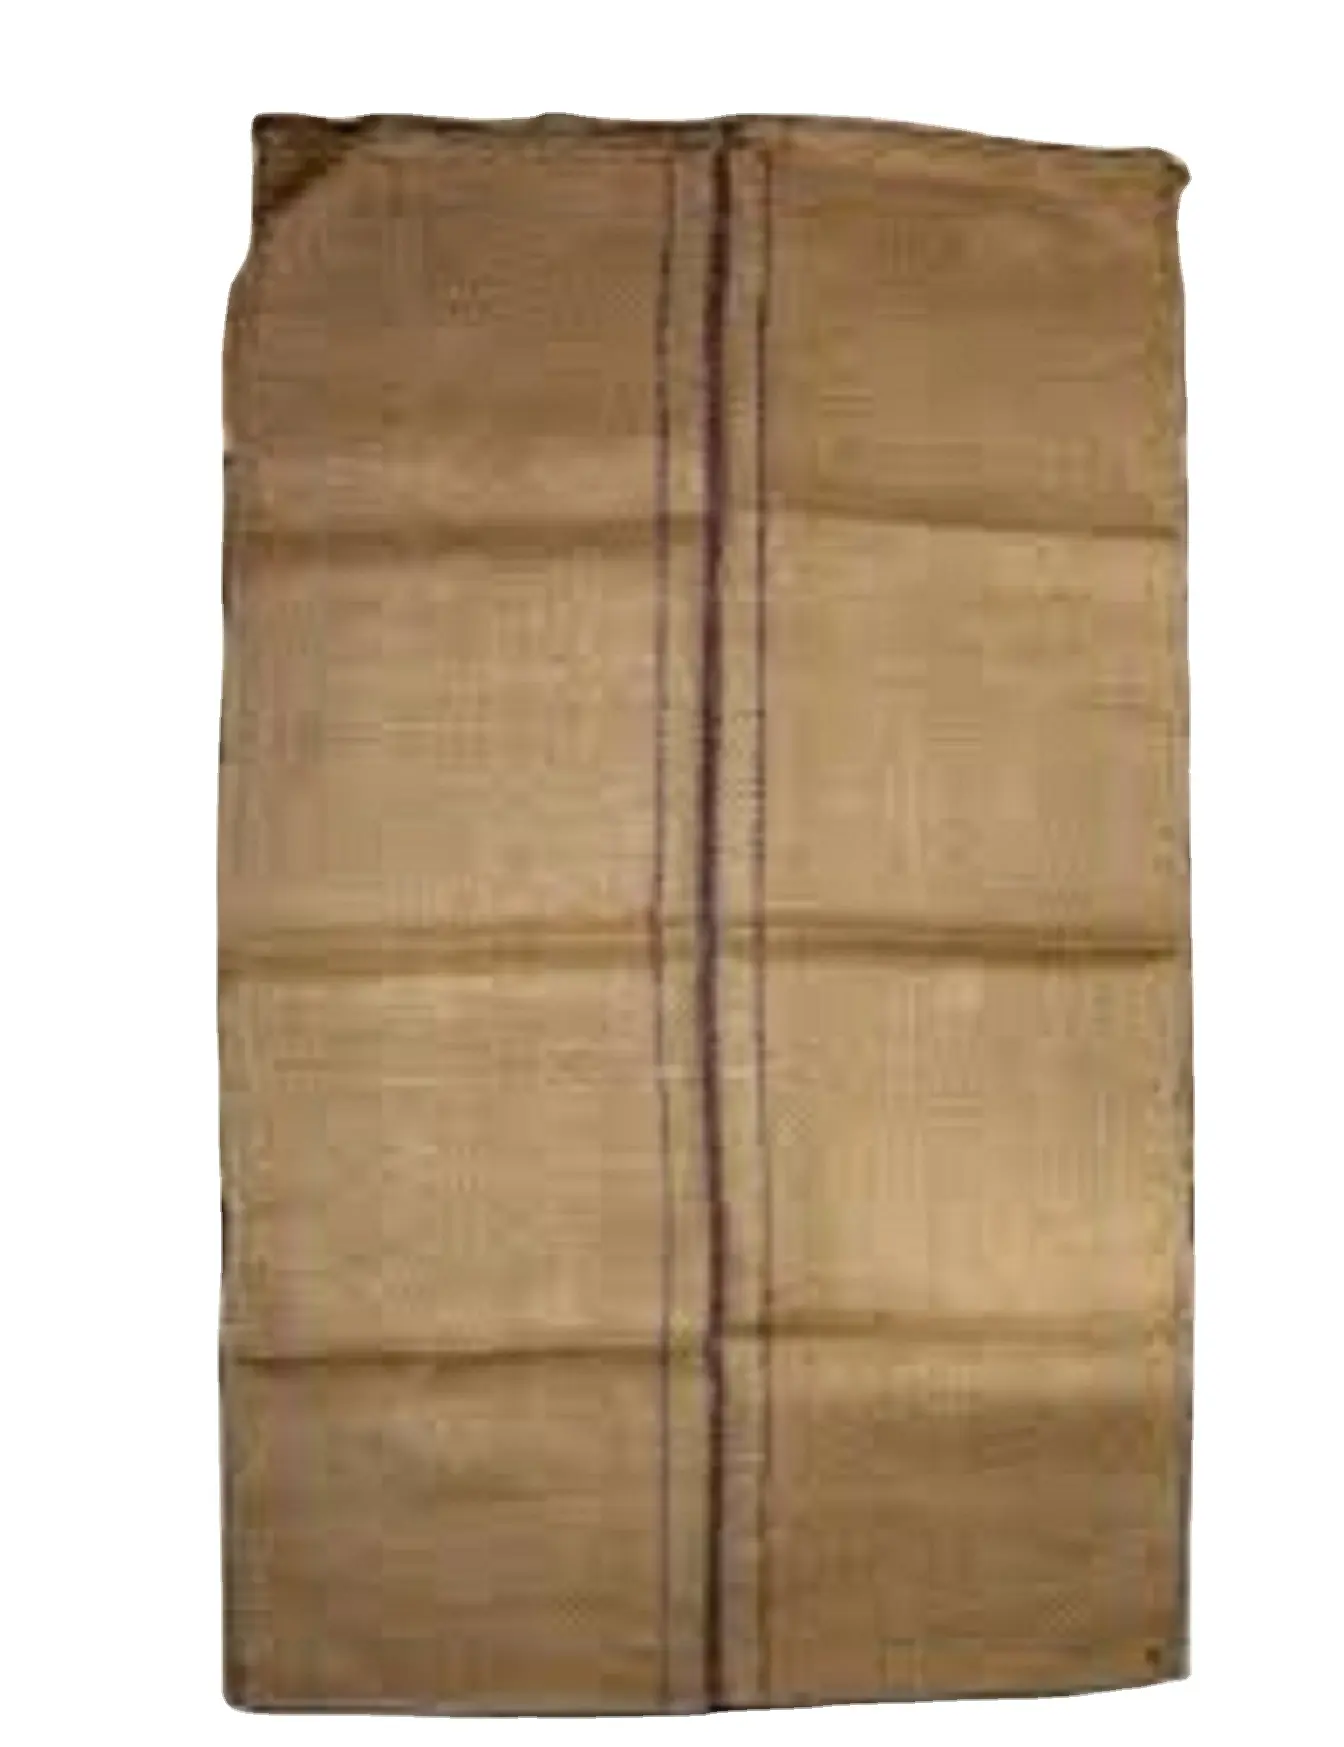 High Quality Food Grade Cocoa Bean and Other Grain Products Jute sack Bag